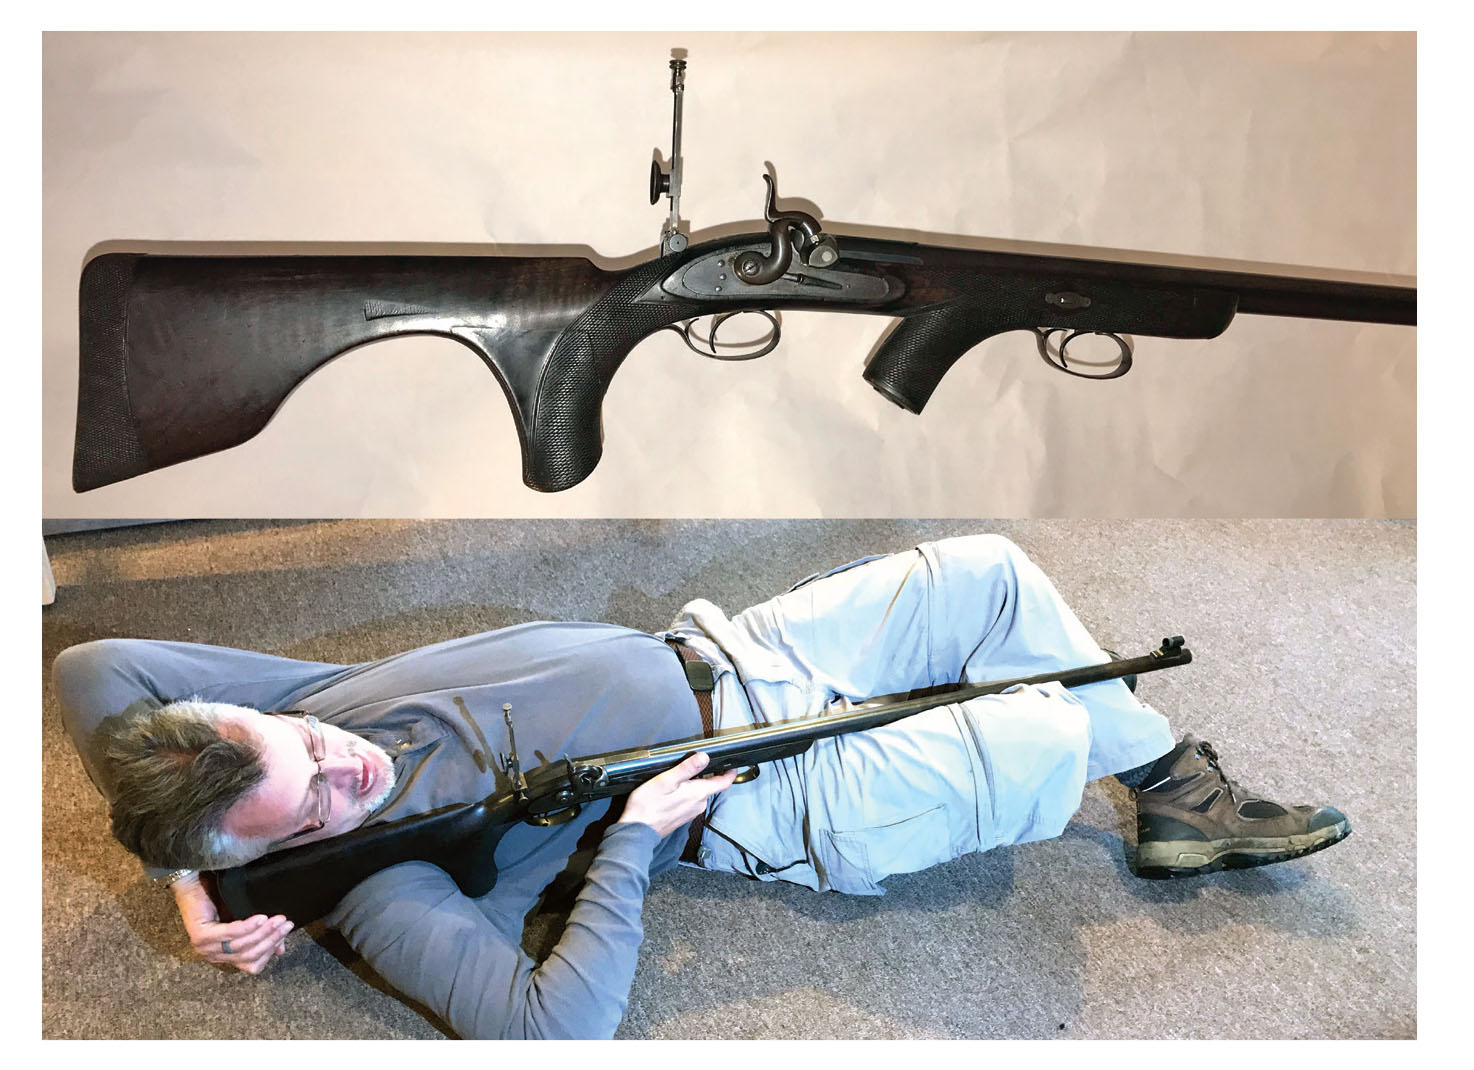 Alexander Henry two-position rifle - they shot body support only. No kidding . . .